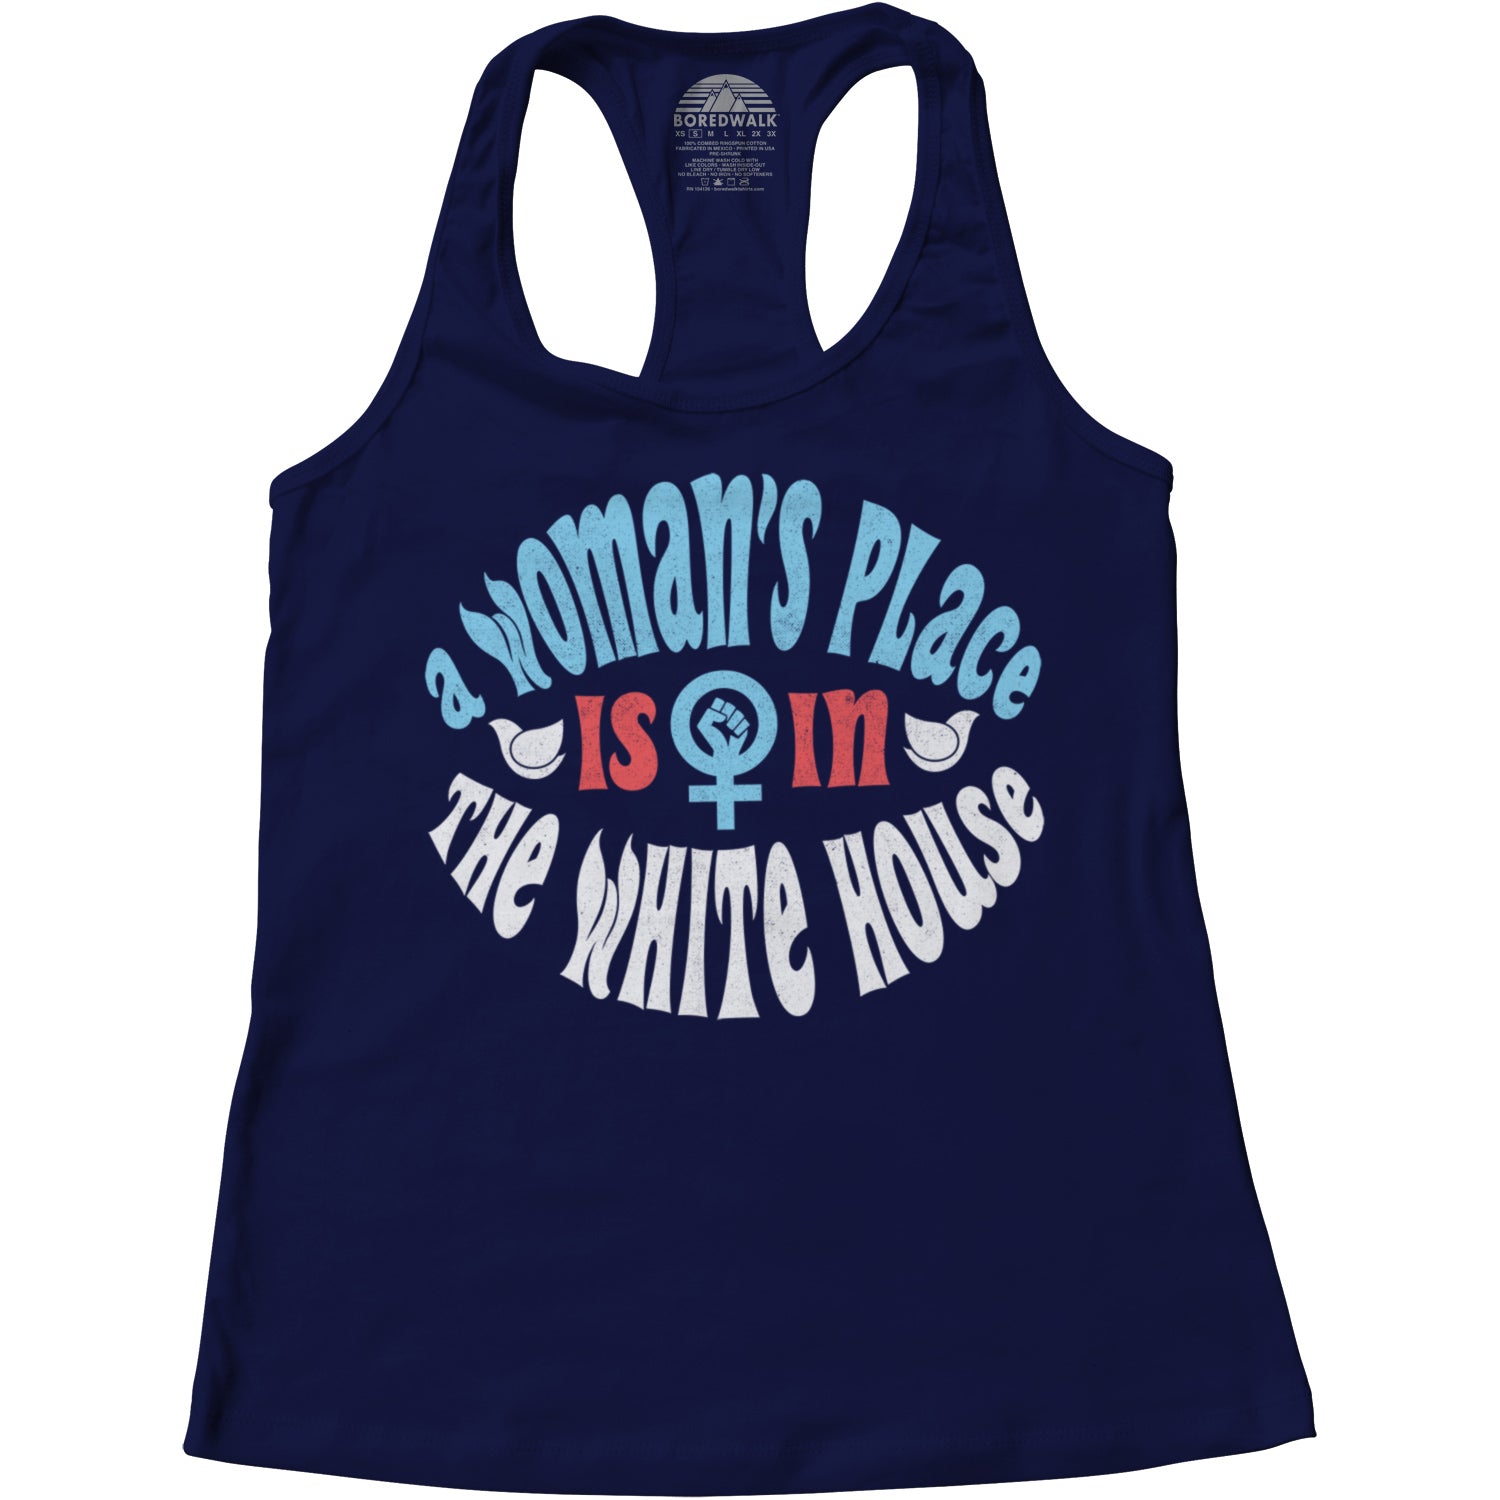 Women's A Woman's Place is in The White House Racerback Tank Top